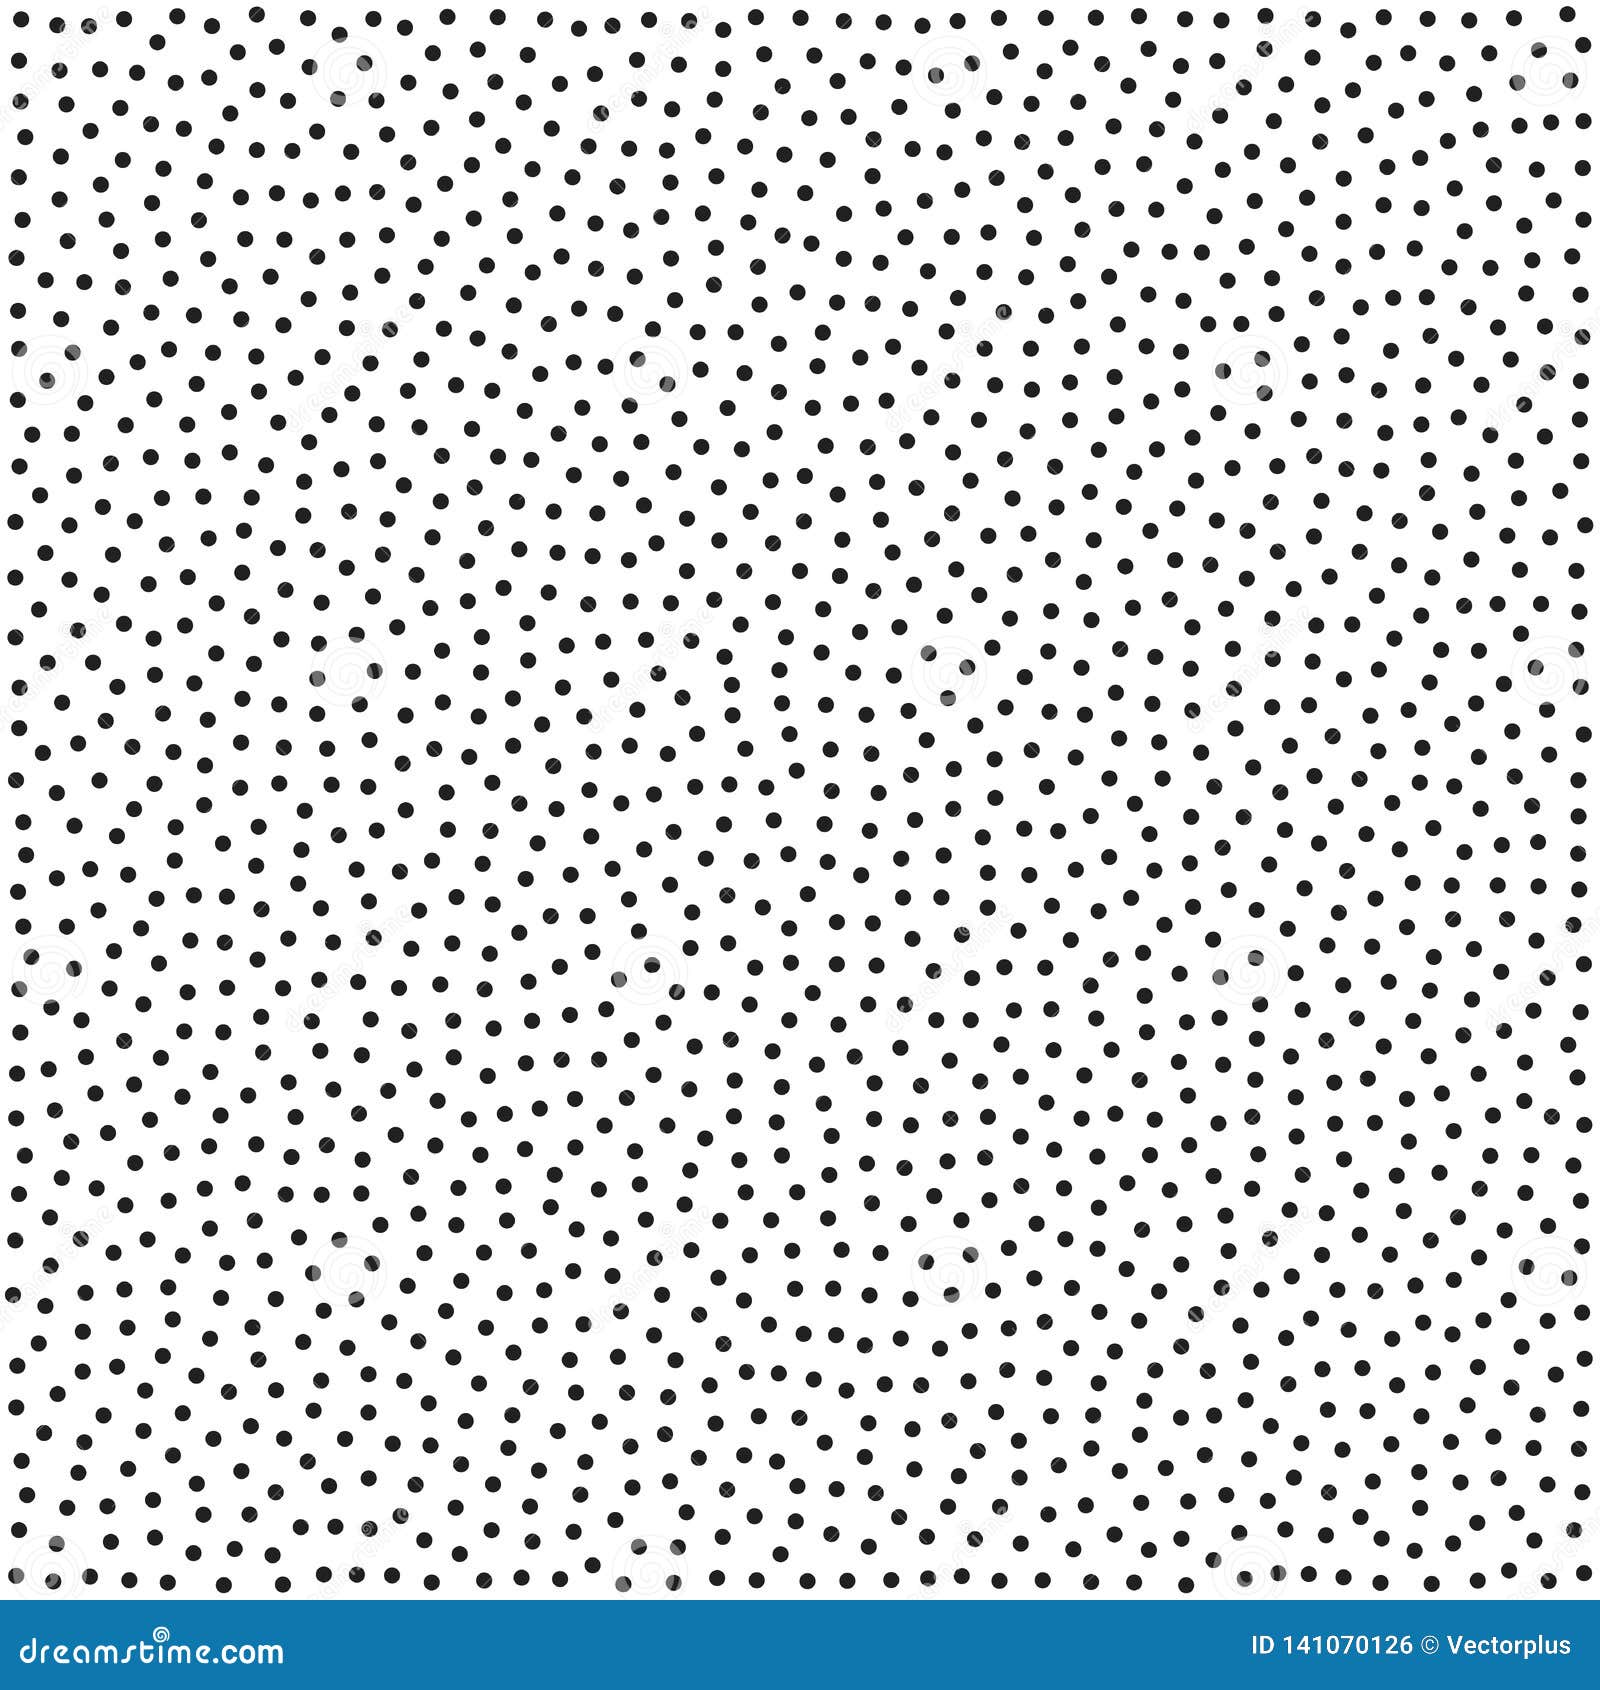 halftone dotted background  pattern. chaotic circle dots  on the white background. seamless asymmetrical